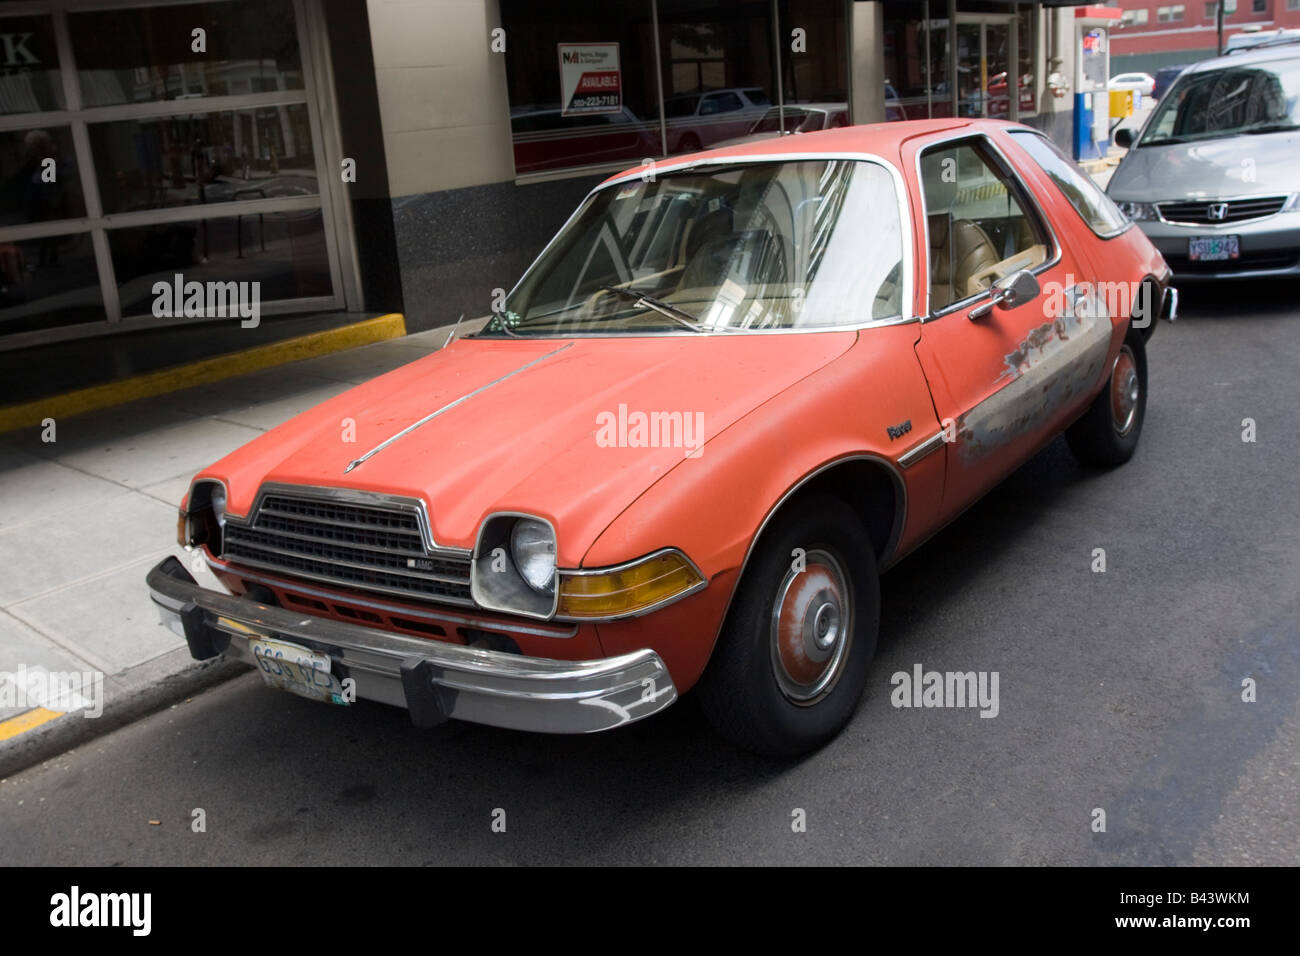 AMC Pacer car in need of paint job Portland Oregon OR USA 2008 Stock Photo